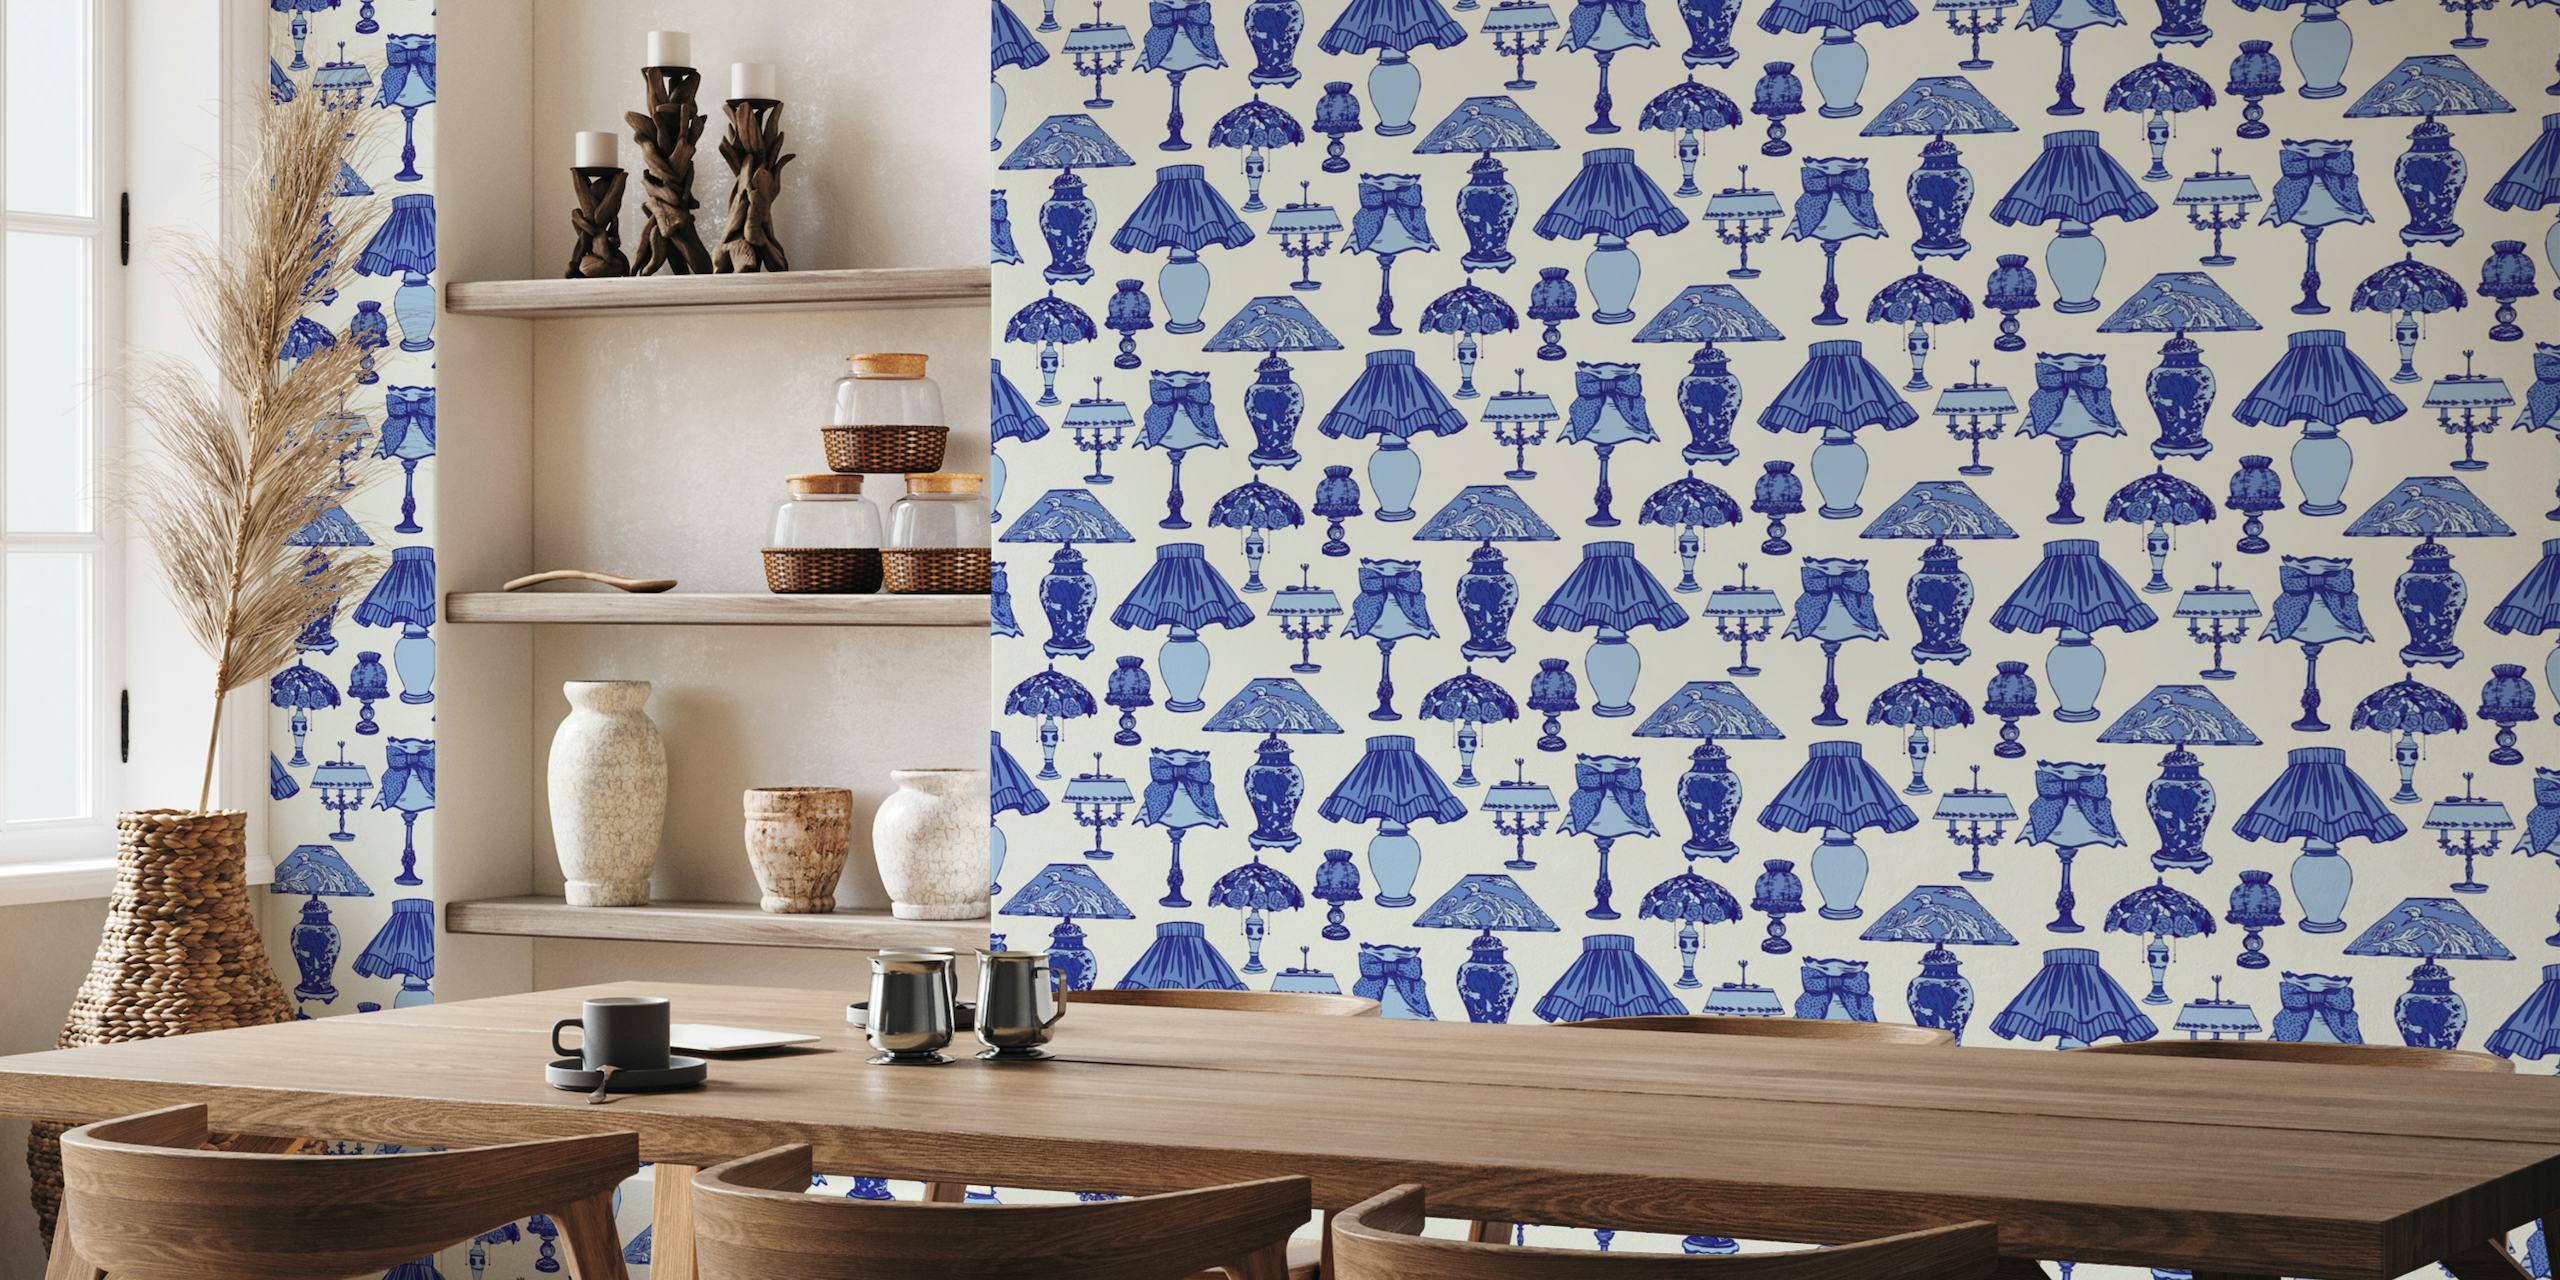 Blue Delft ornamental lamps pattern wall mural for kitchen decor